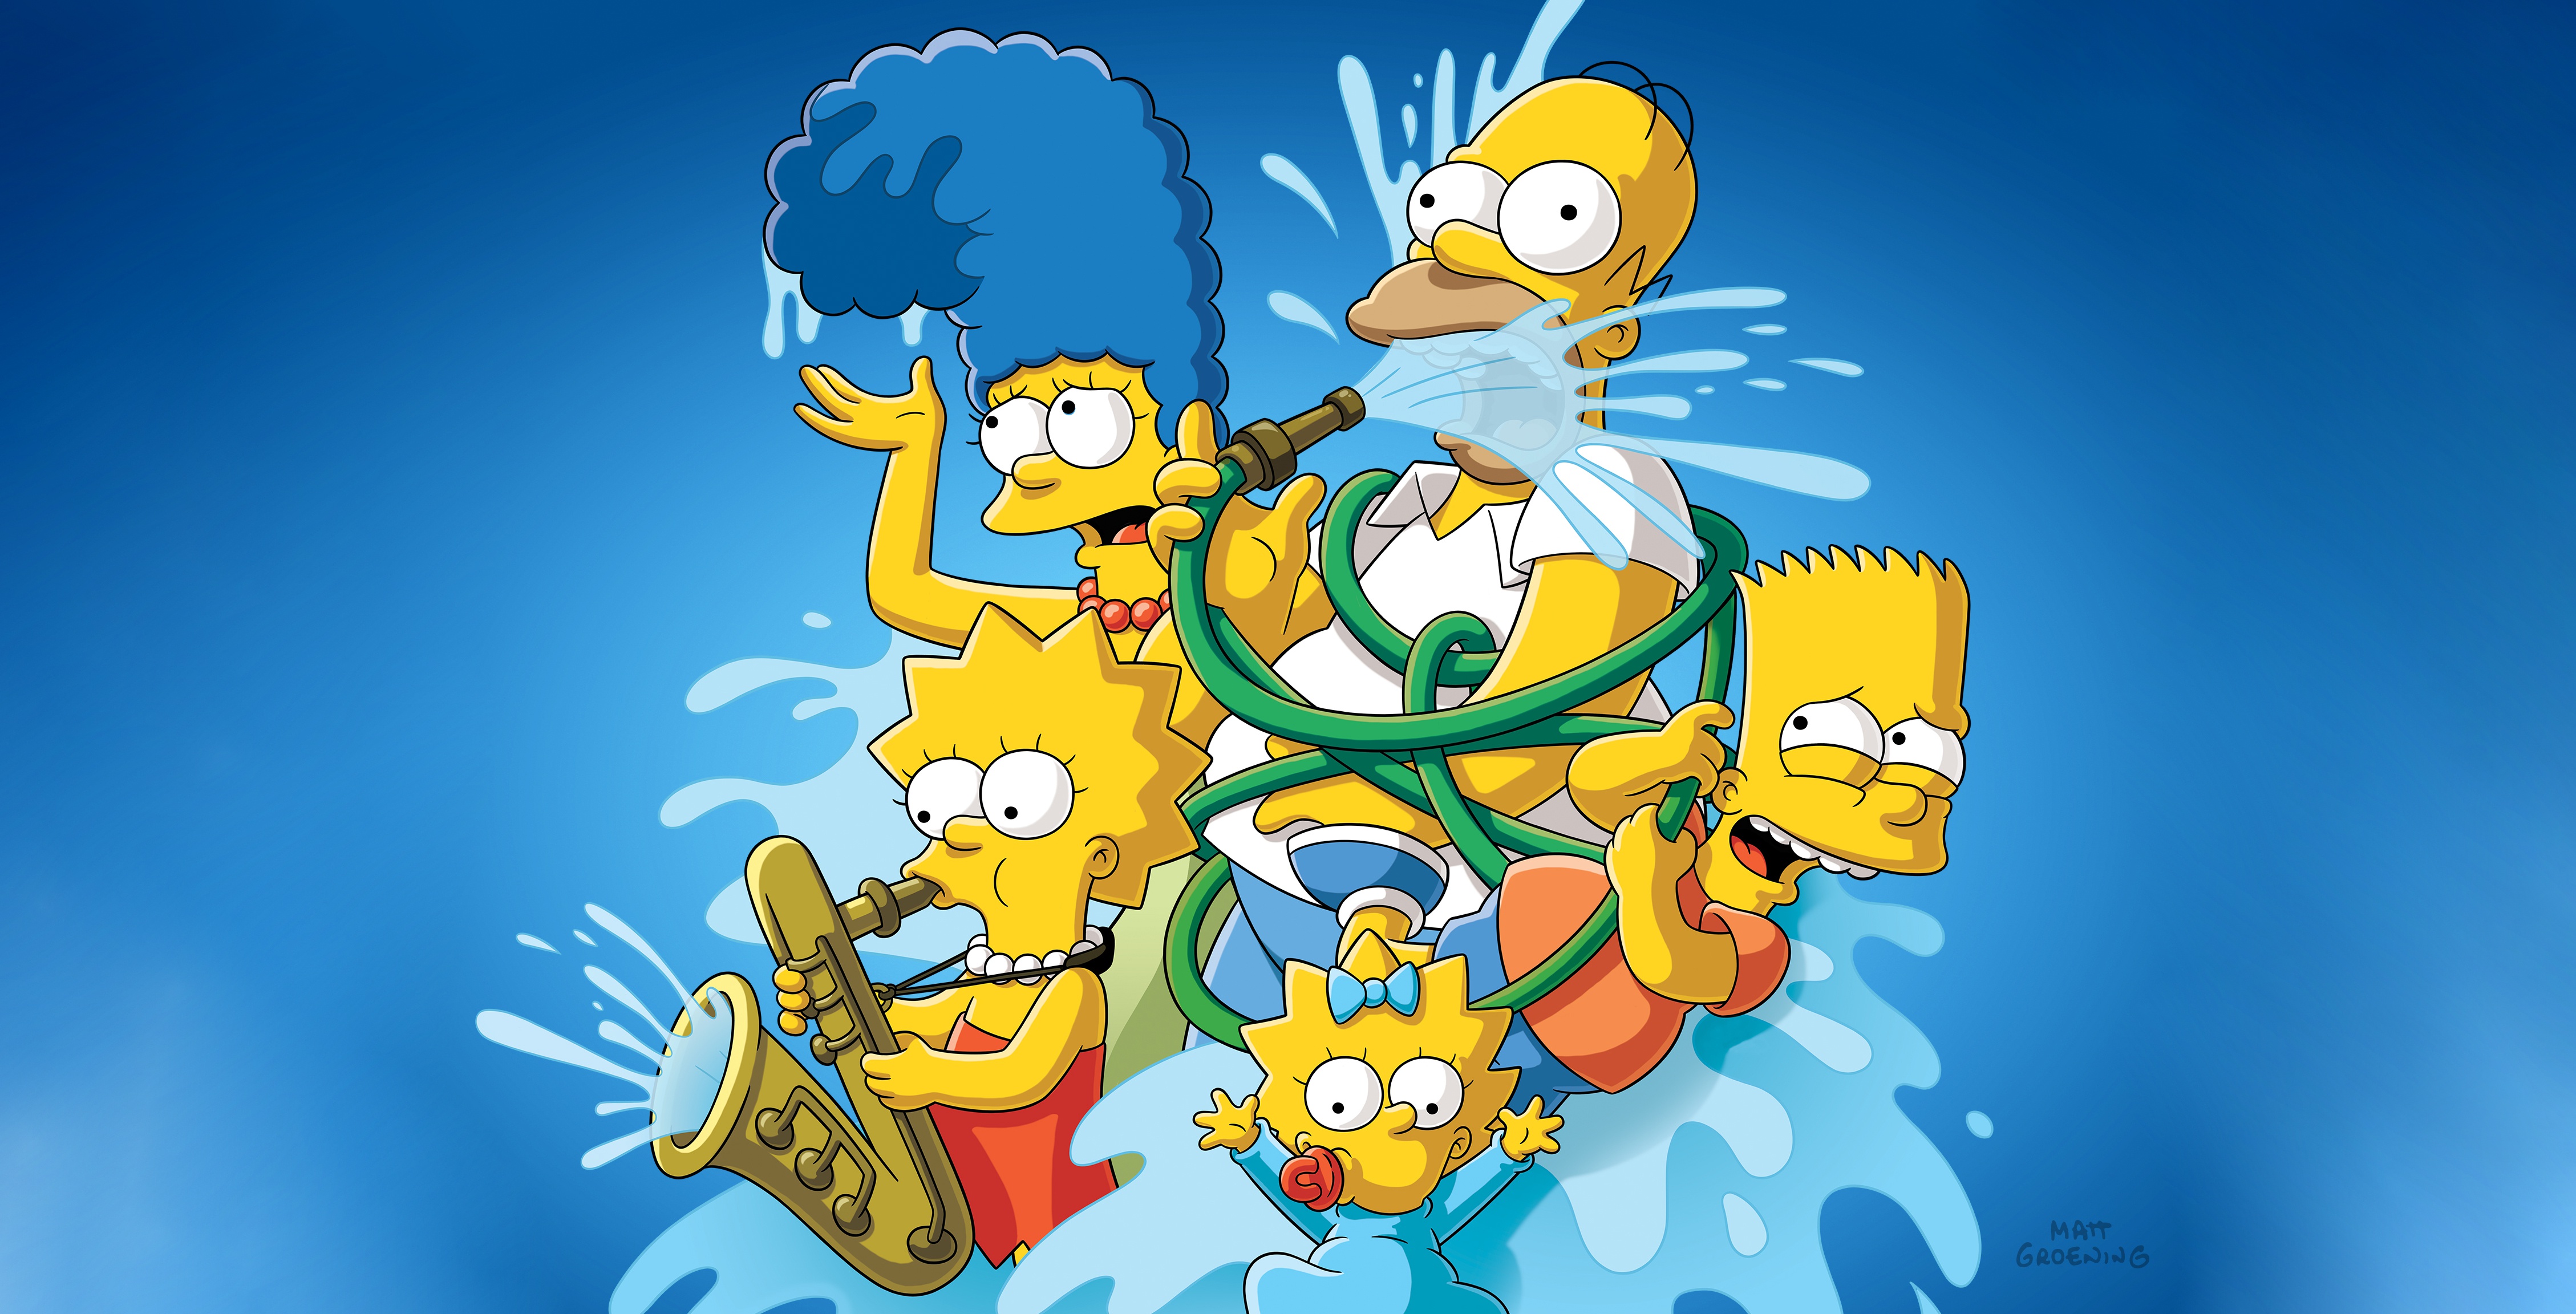 The Simpsons 4k Ultra HD Wallpaper. Background Image